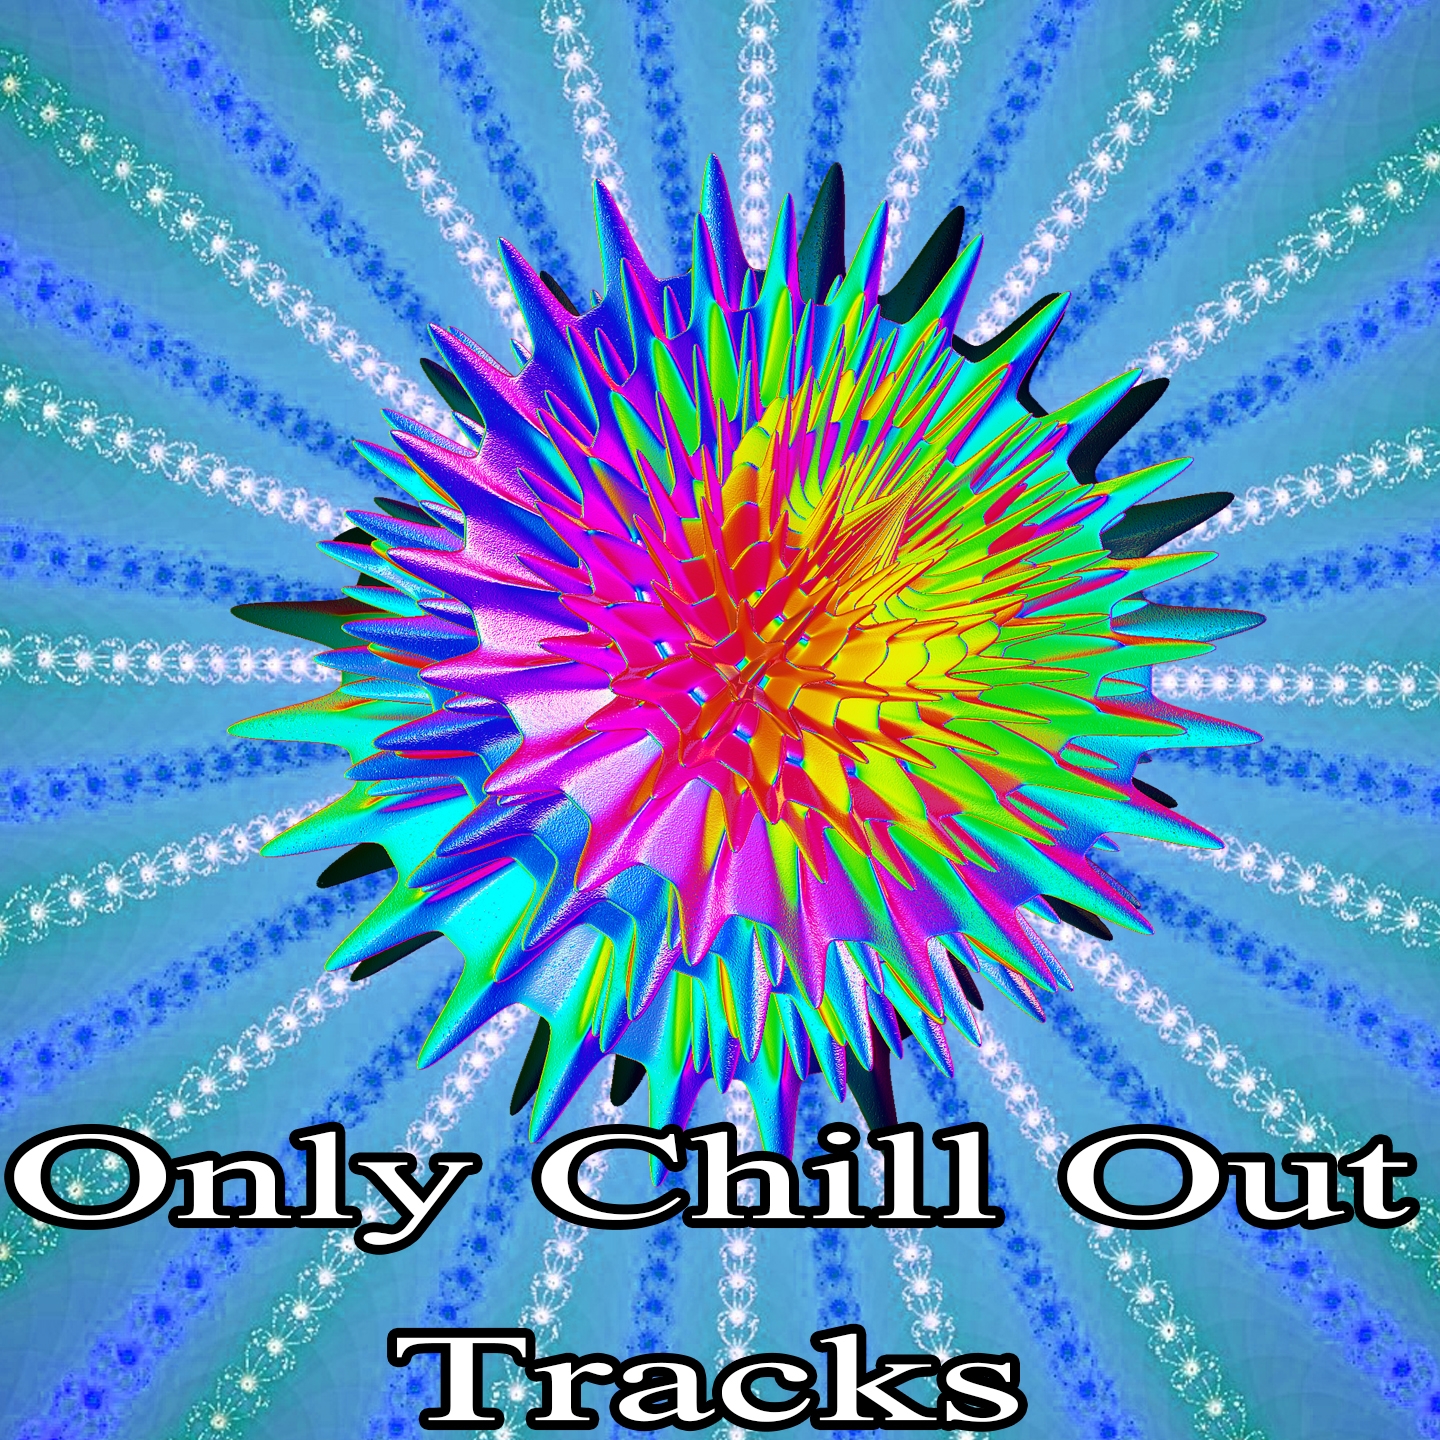 Only Chill Out Tracks